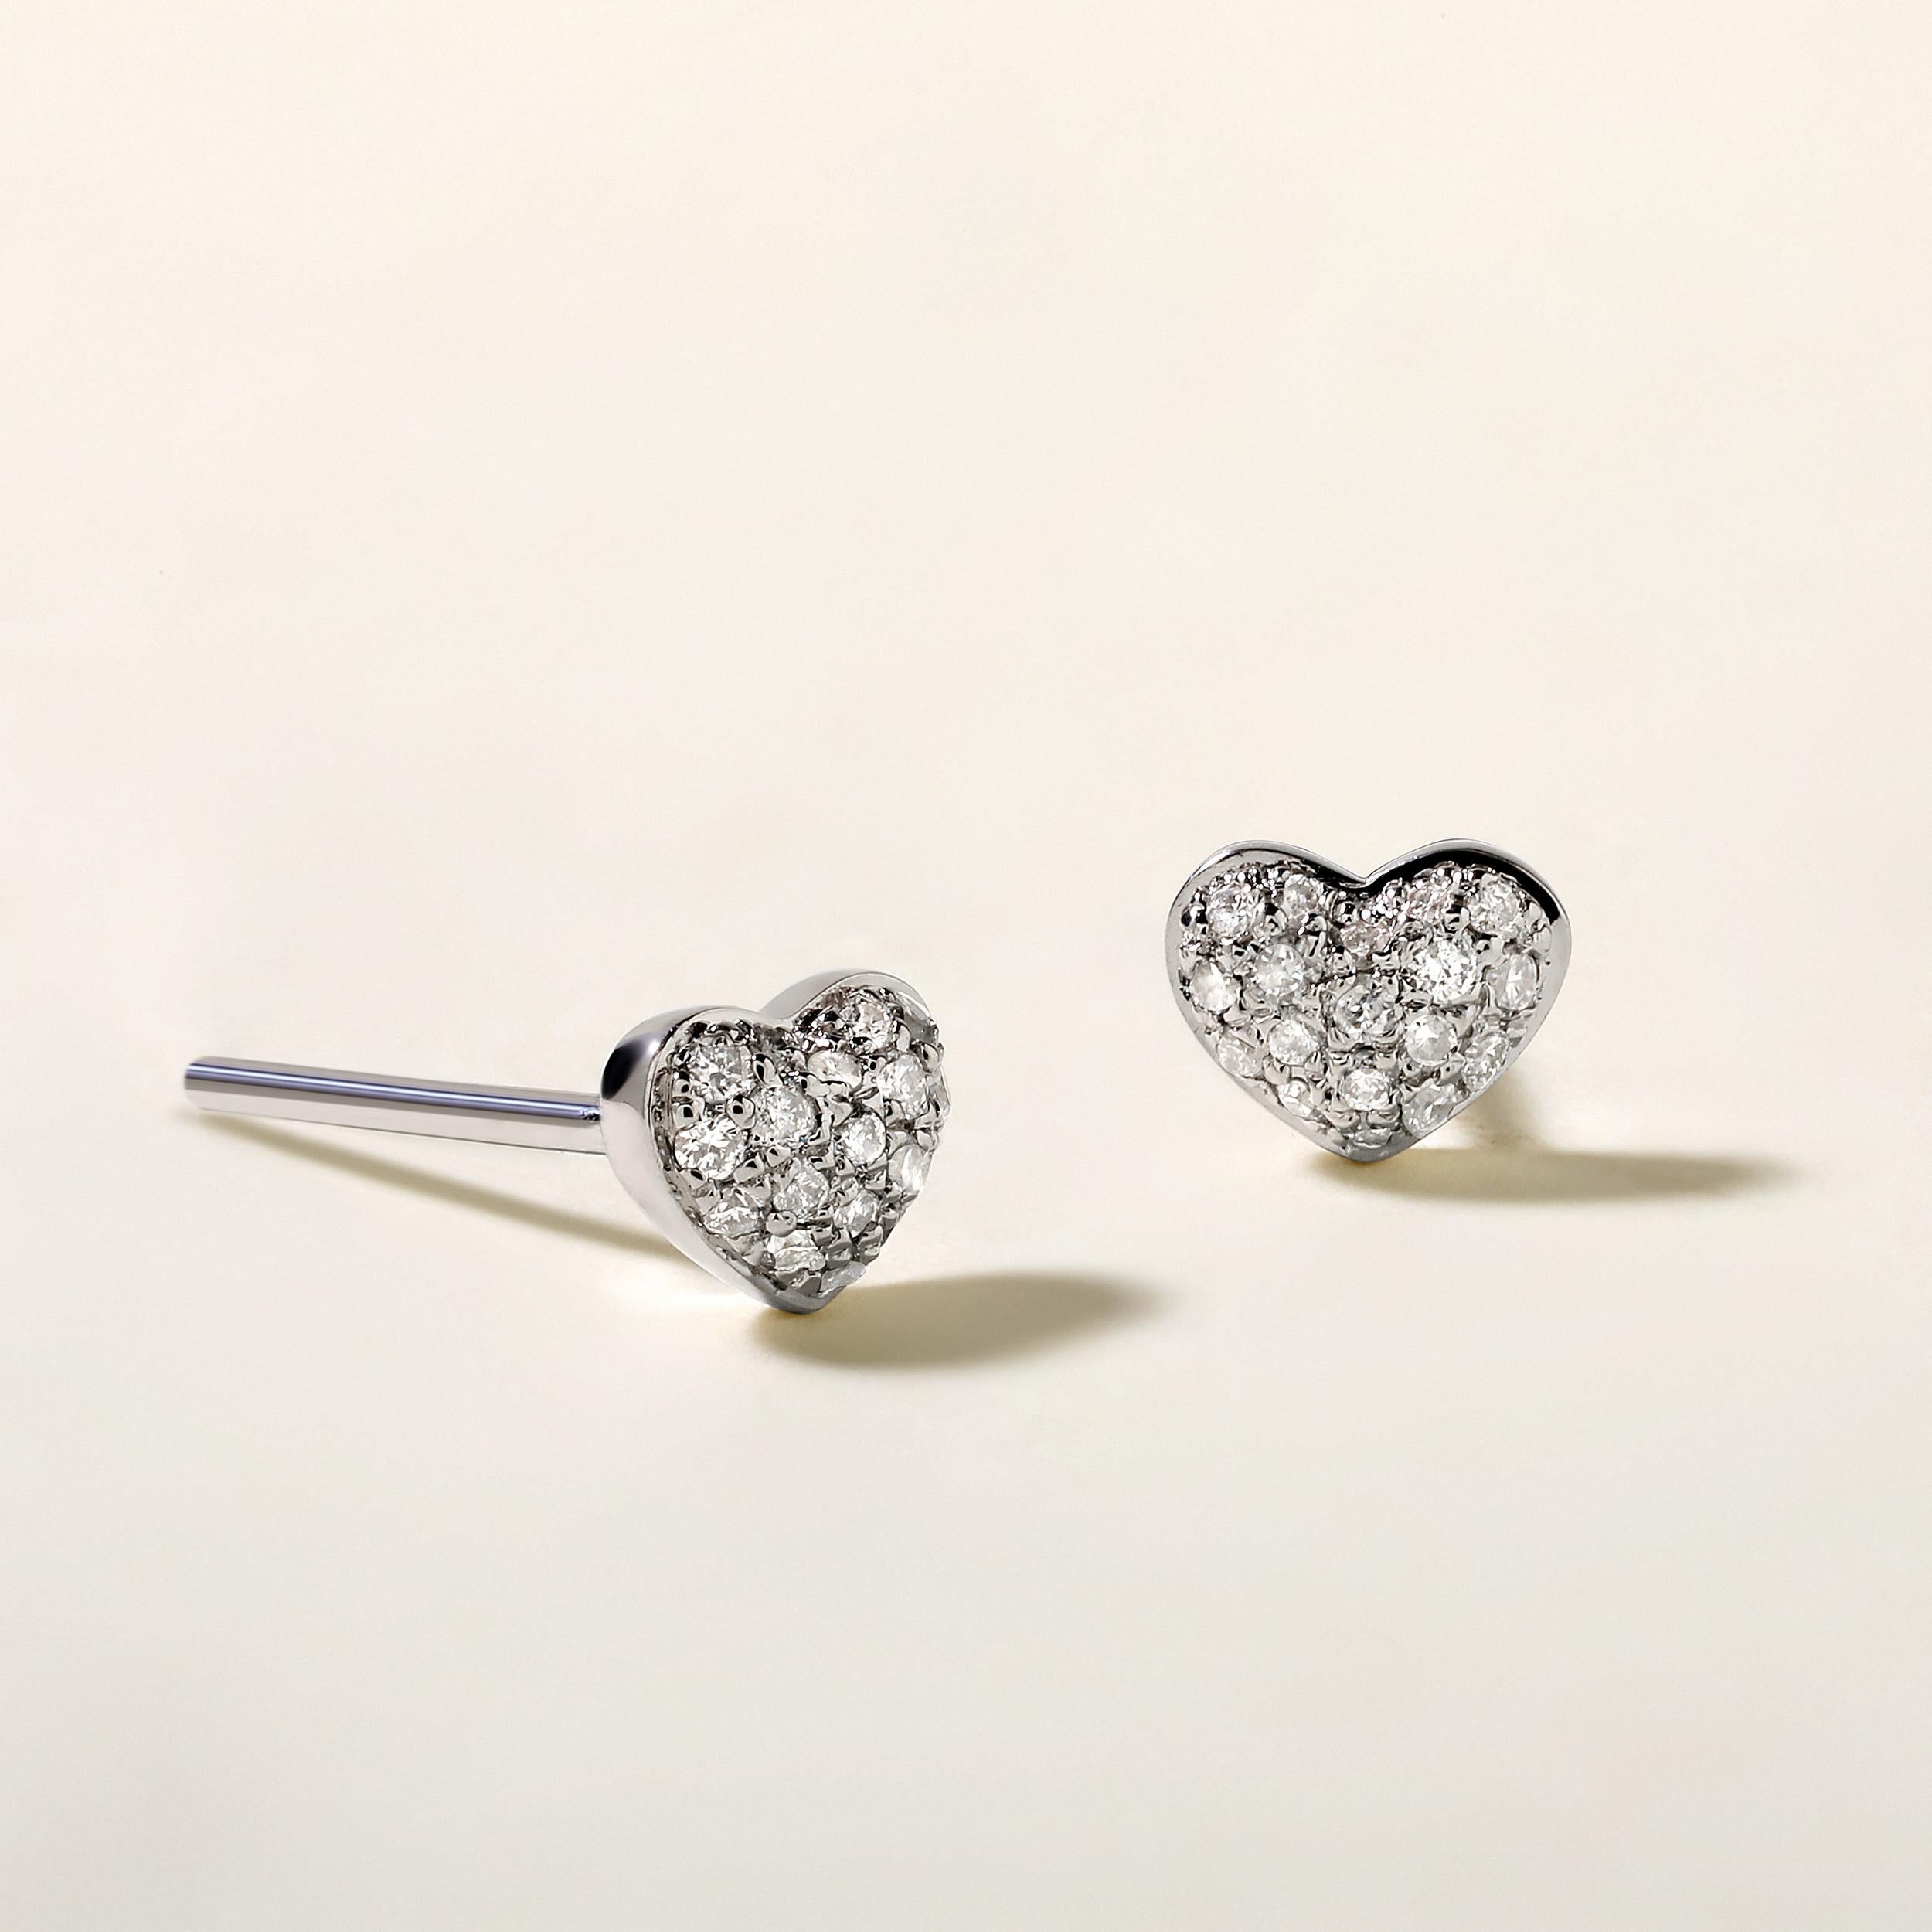 Crafted in 1.02 grams of 14K White Gold, the earrings contains 36 stones of Round Diamonds with a total of 0.14 carat in F-G color and I1-I2 clarity.

CONTEMPORARY AND TIMELESS ESSENCE: Crafted in 14-karat/18-karat with 100% natural diamond and